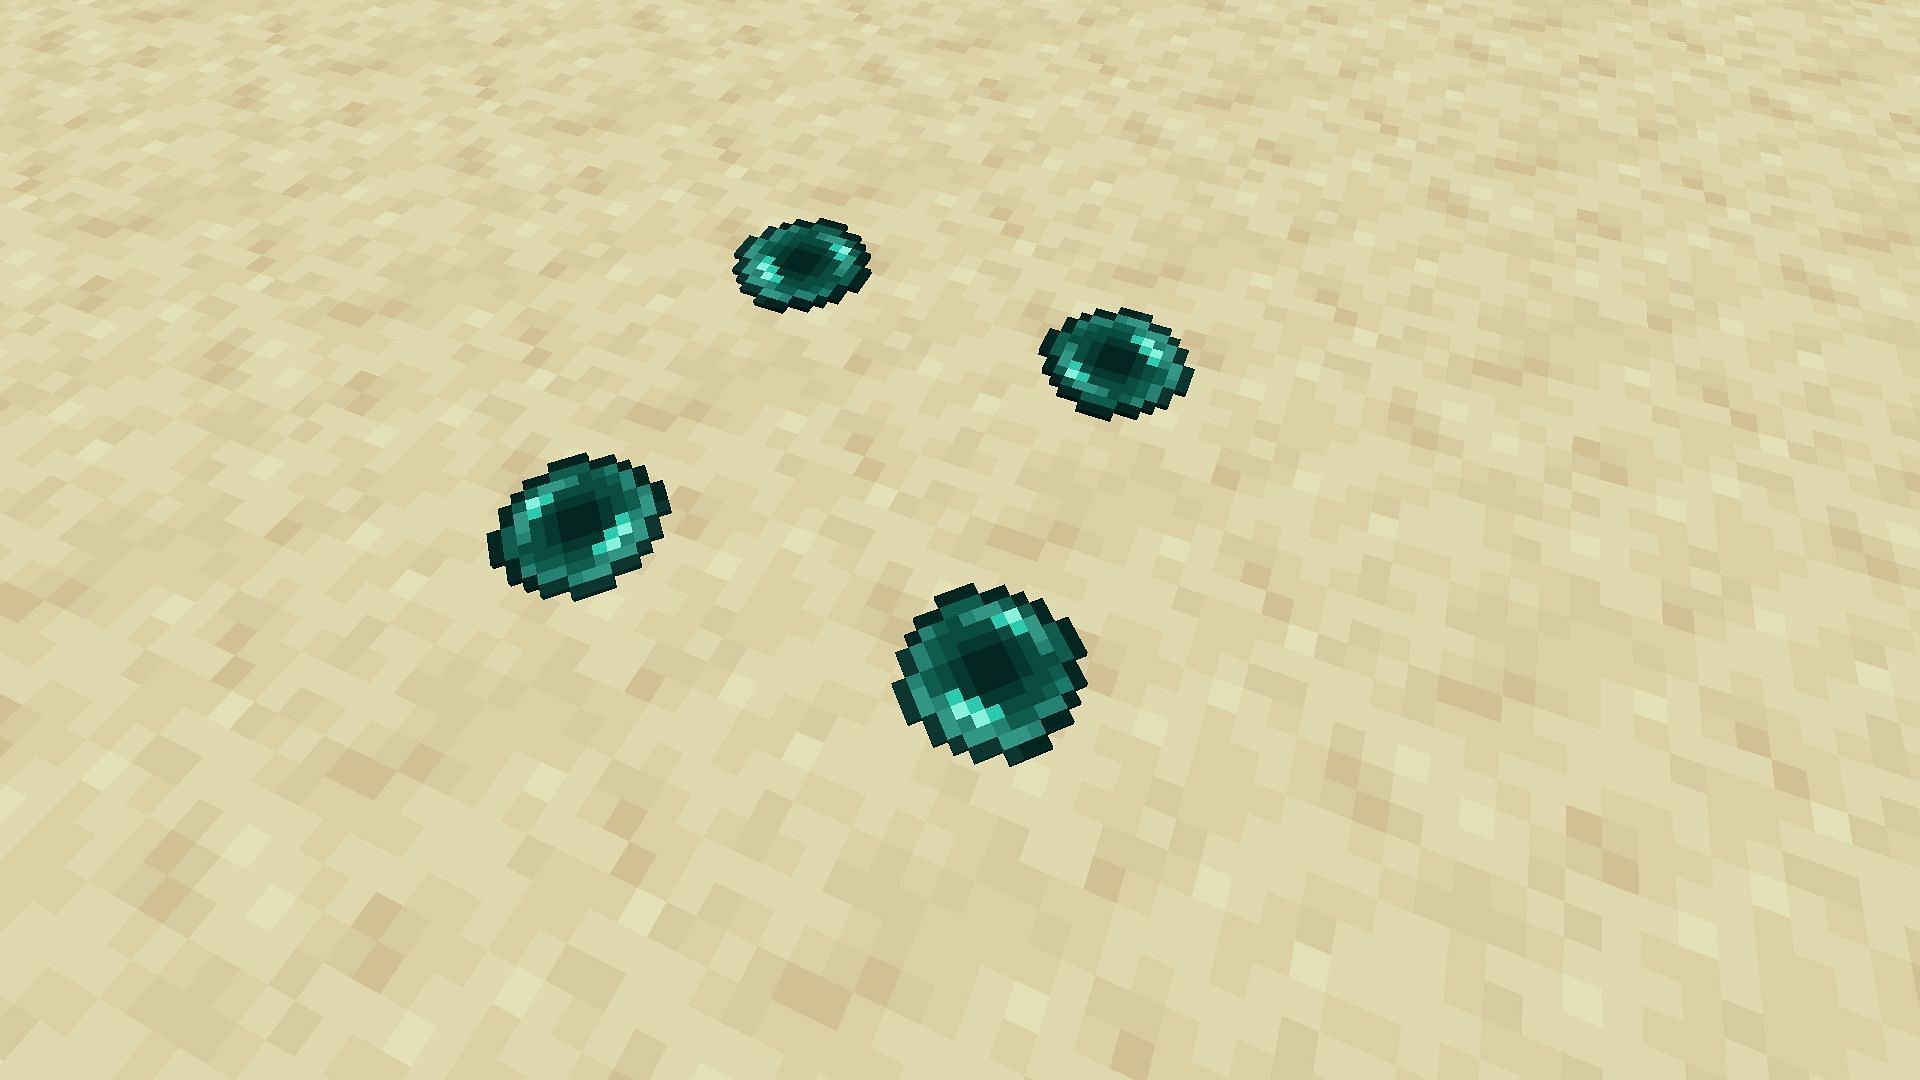 Enderman can drop Ender Pearls in addition to loads of XP in Minecraft (Image via Mojang)